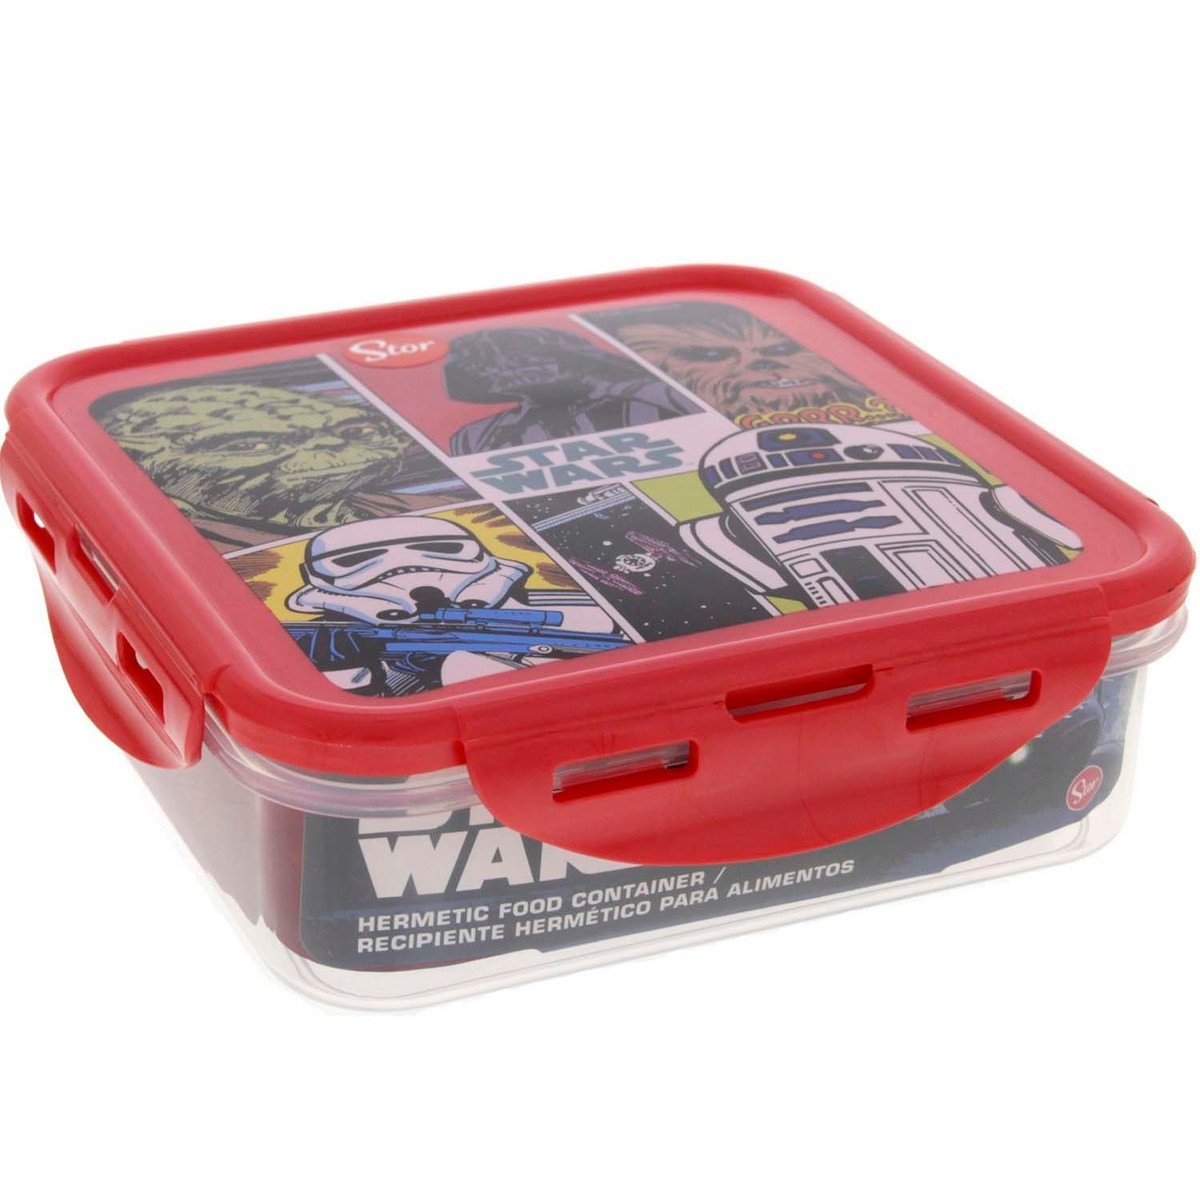 Star Wars Hermetic Food Container Square 82464 750ml